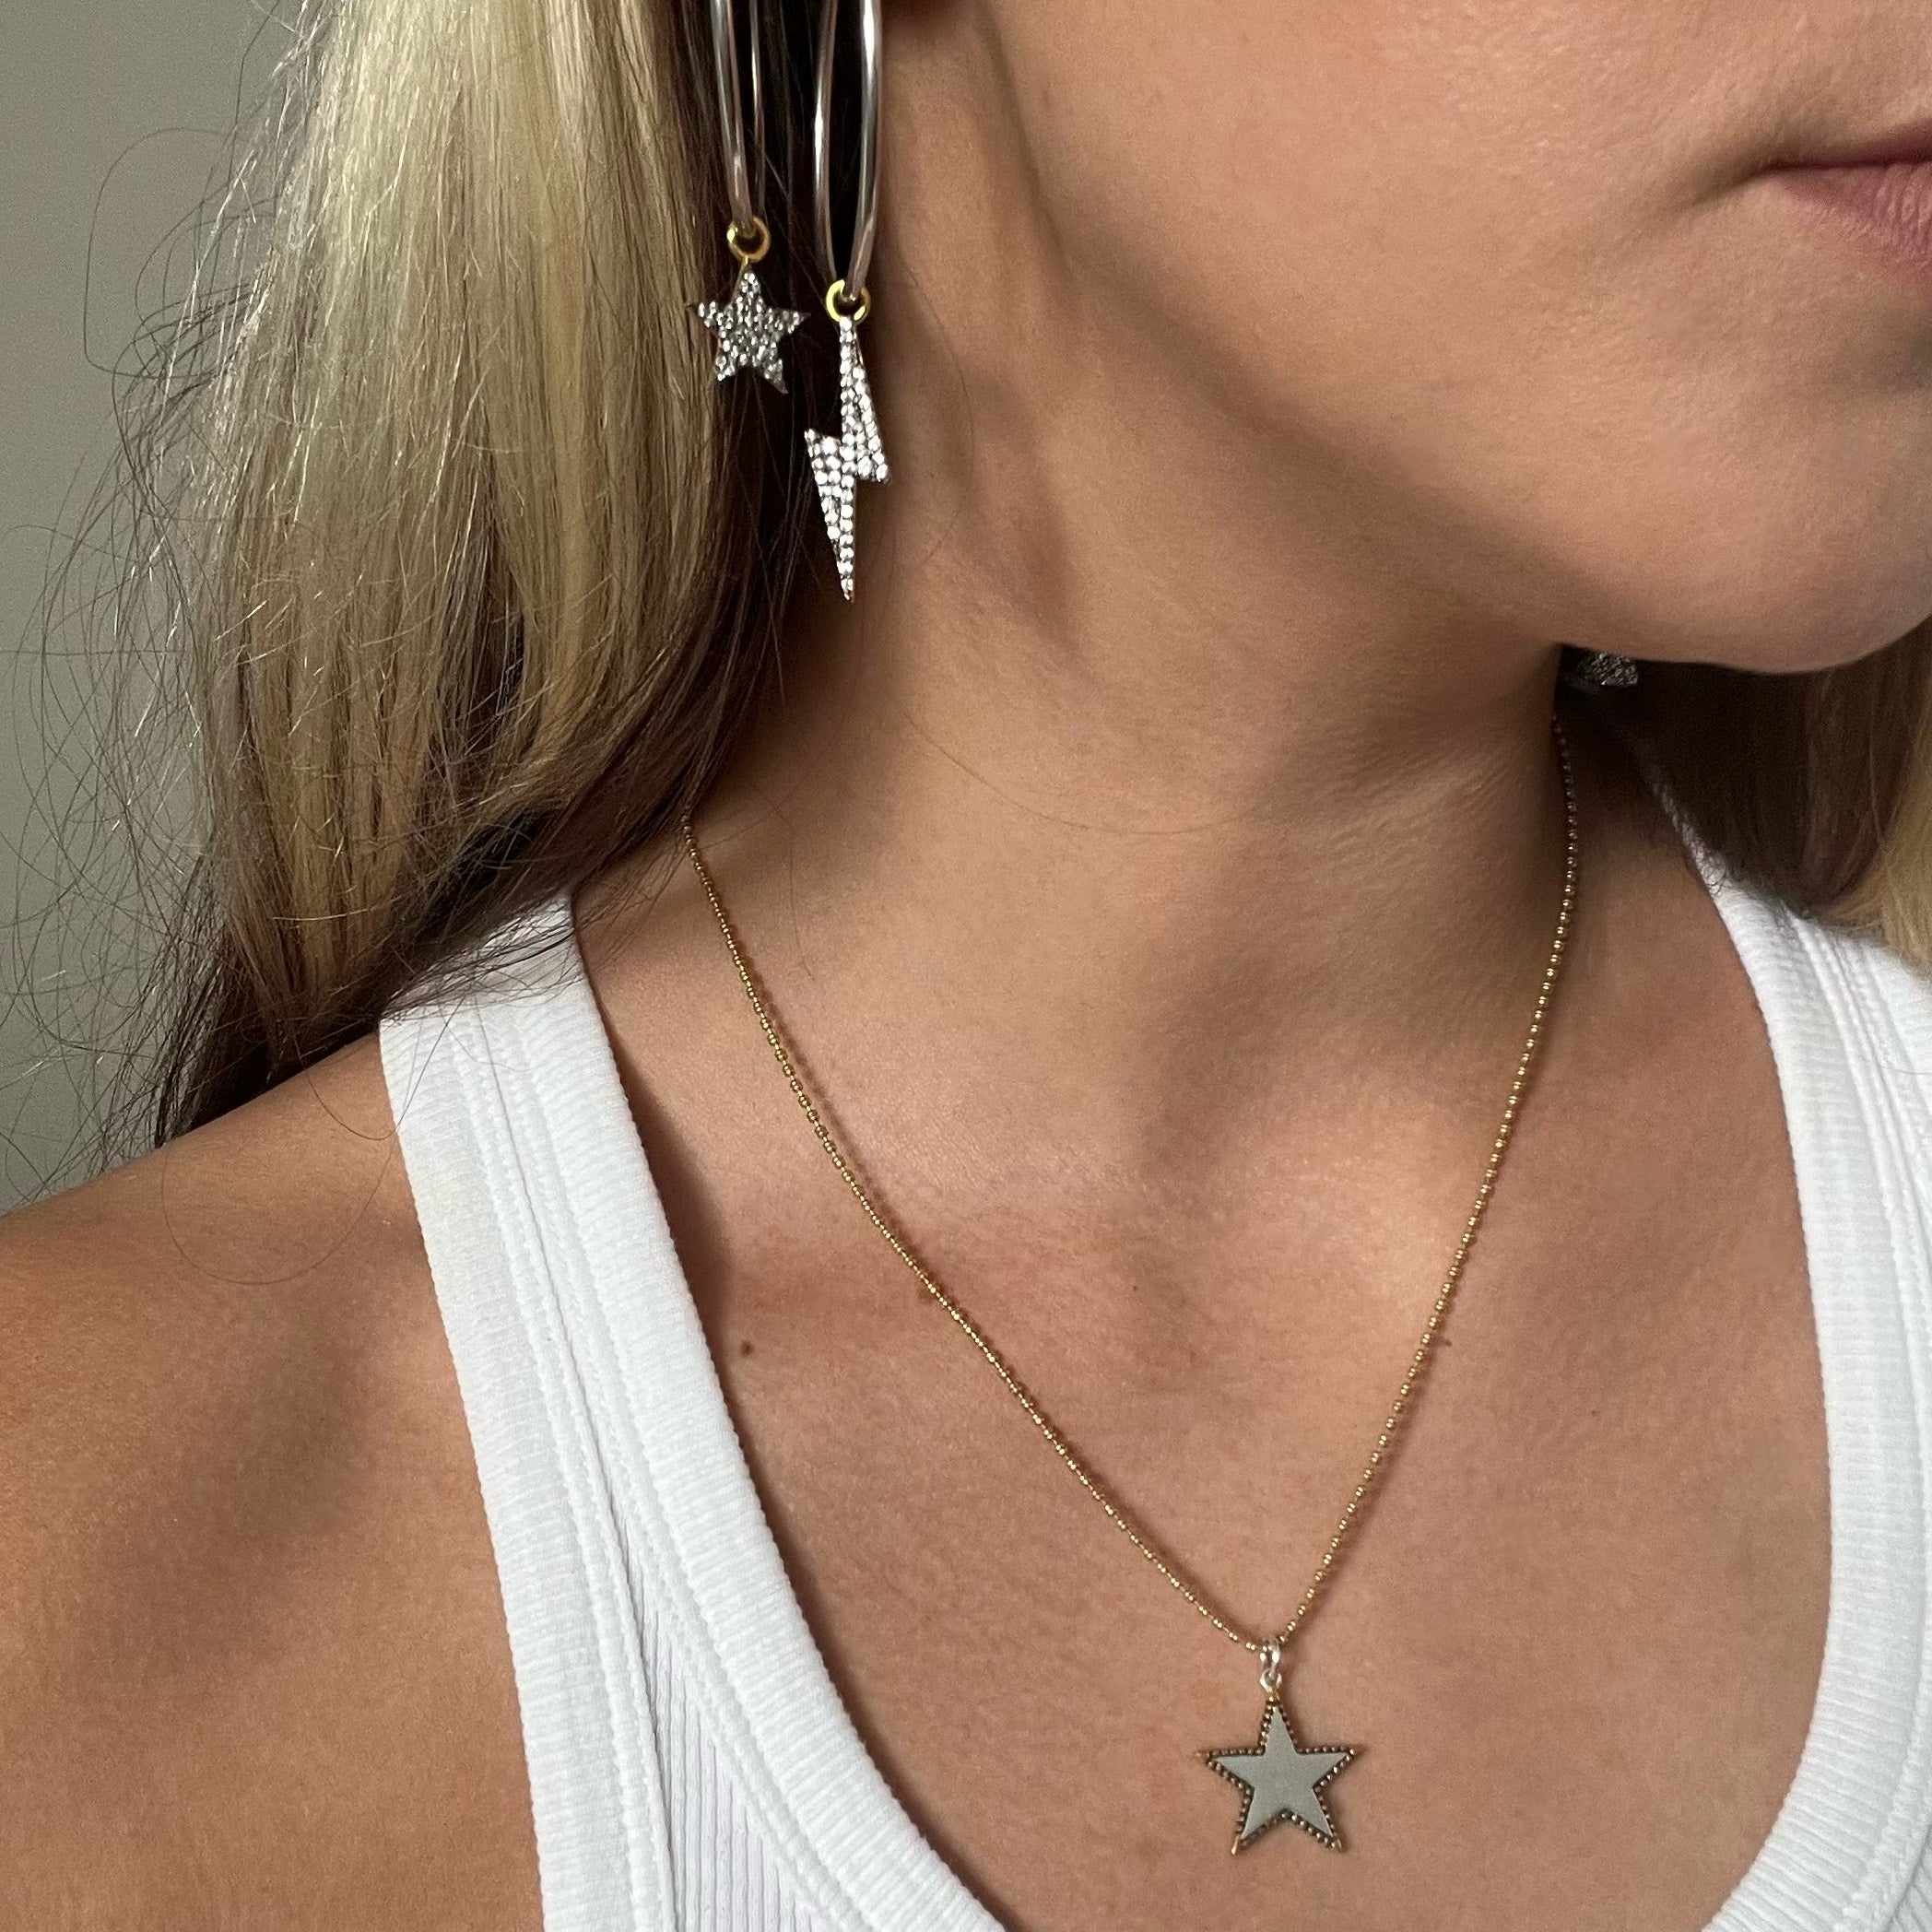 Rock Star Gold and Silver Necklace